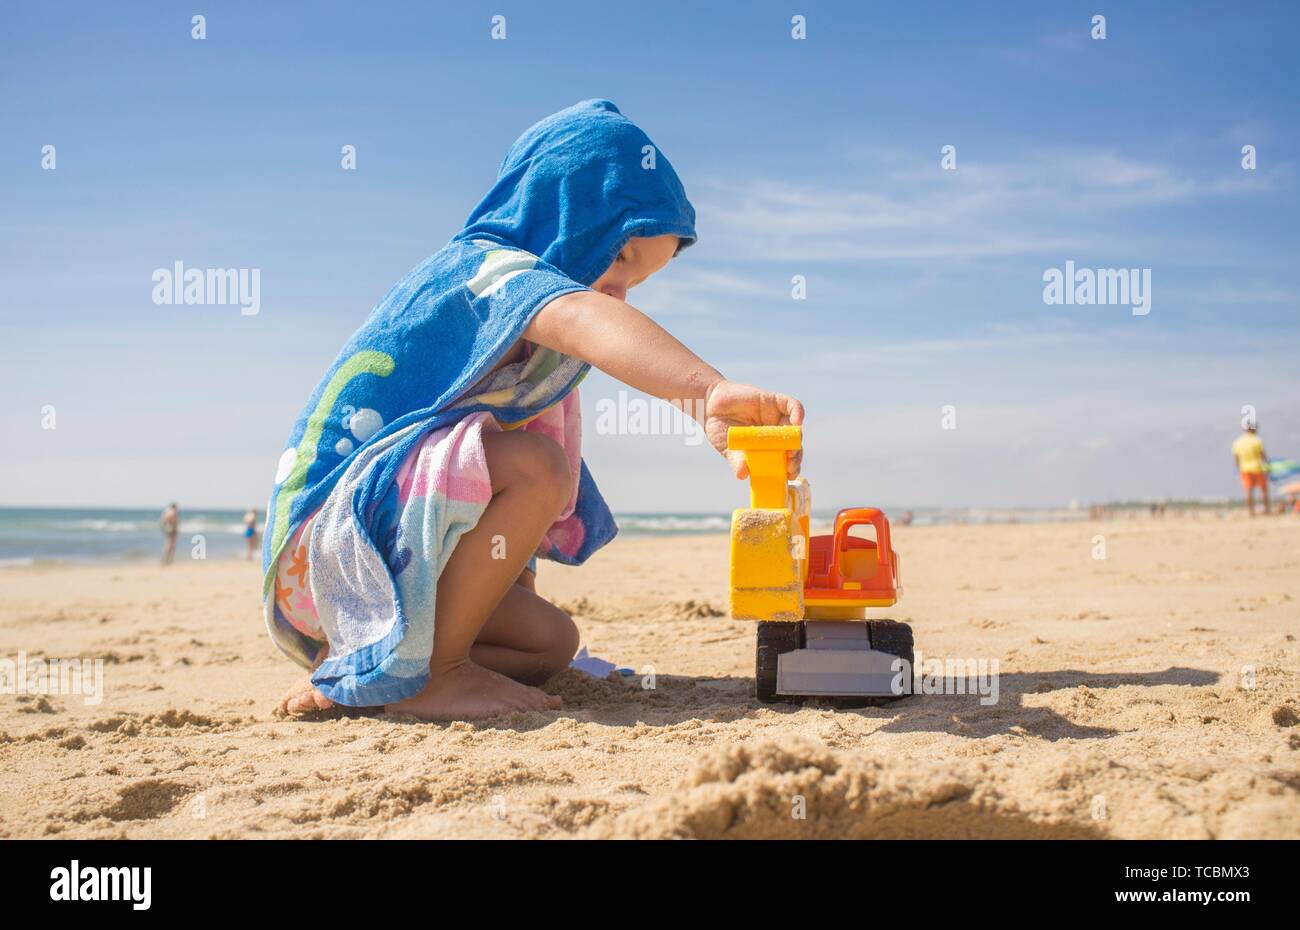 Baby boy playing on sand at the beach with excavator toy. He is wearing hooded poncho towel. Stock Photo